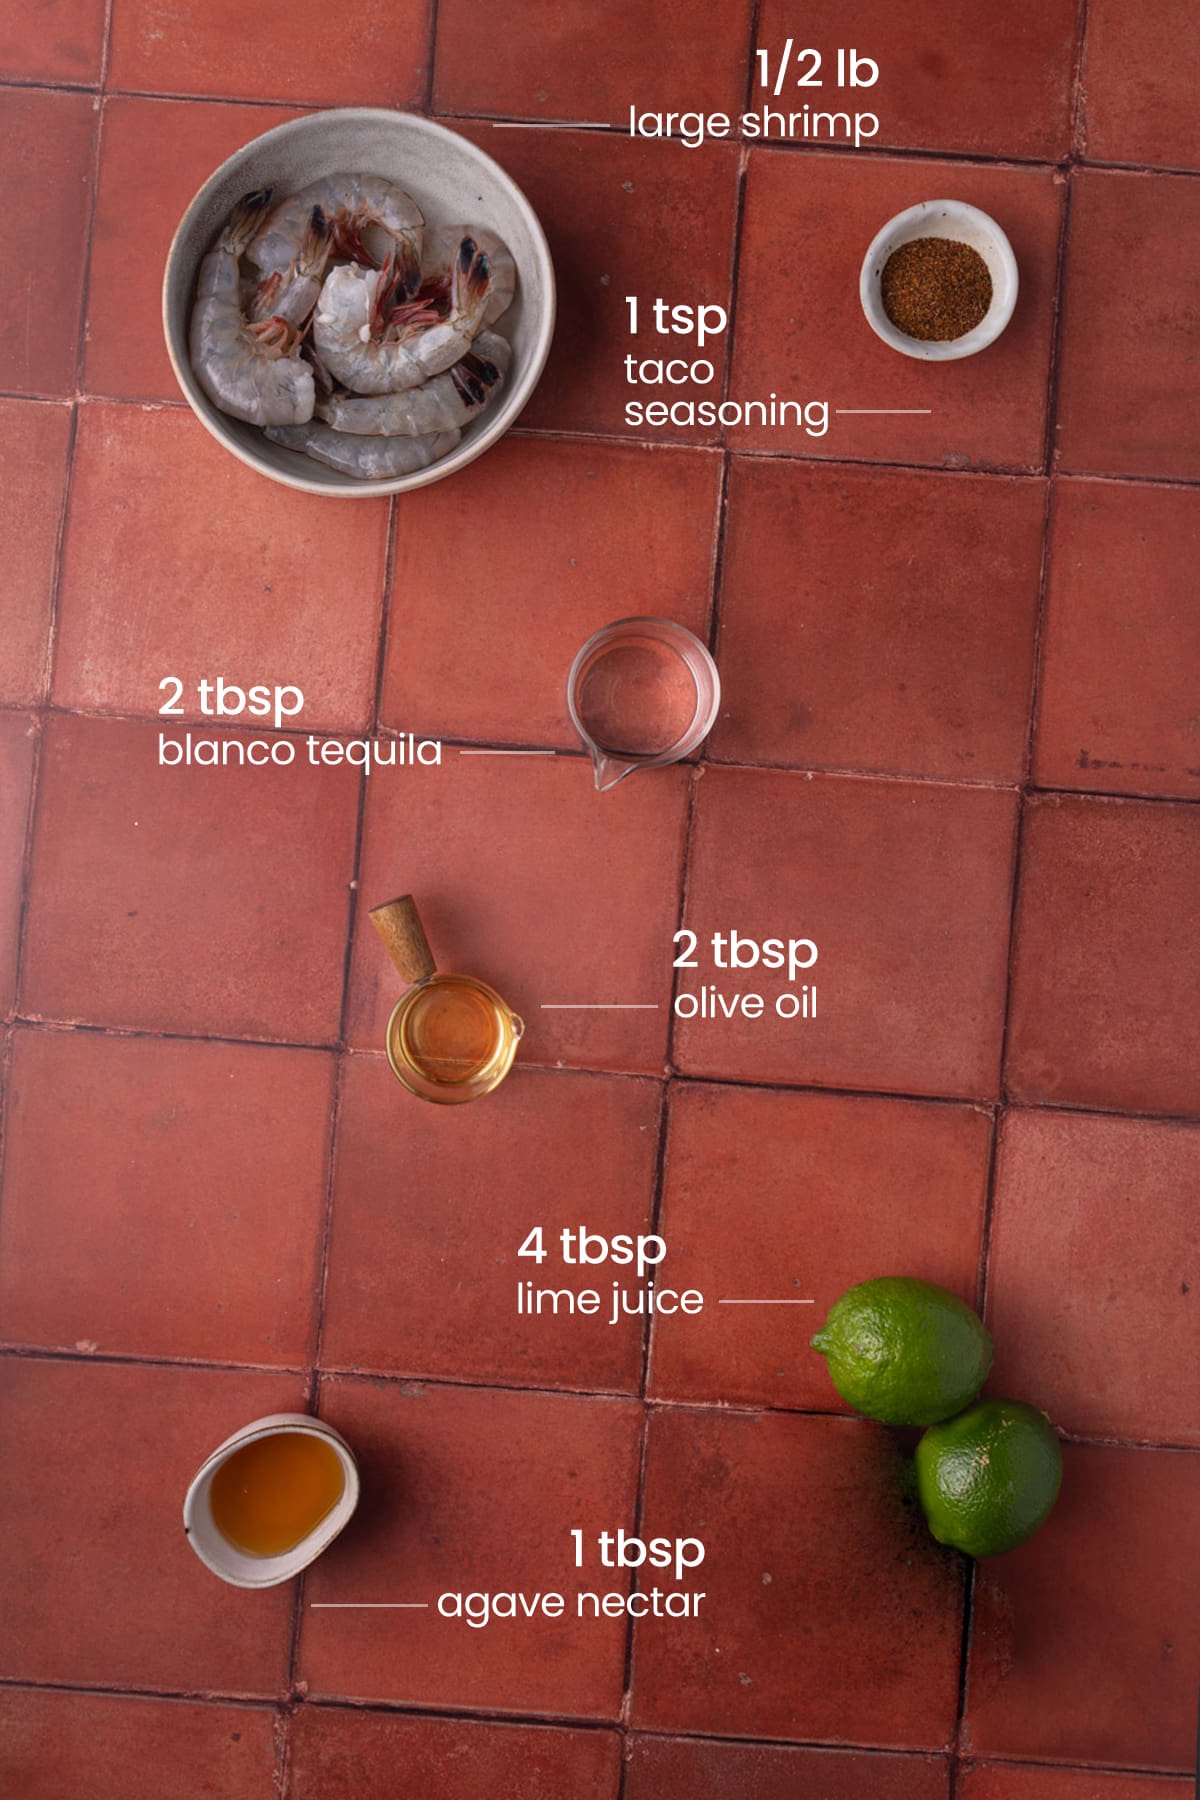 All ingredients needed for tequila lime shrimp including shrimp, taco seasoning, blanco tequila, olive oil, lime juice, and agave nectar.